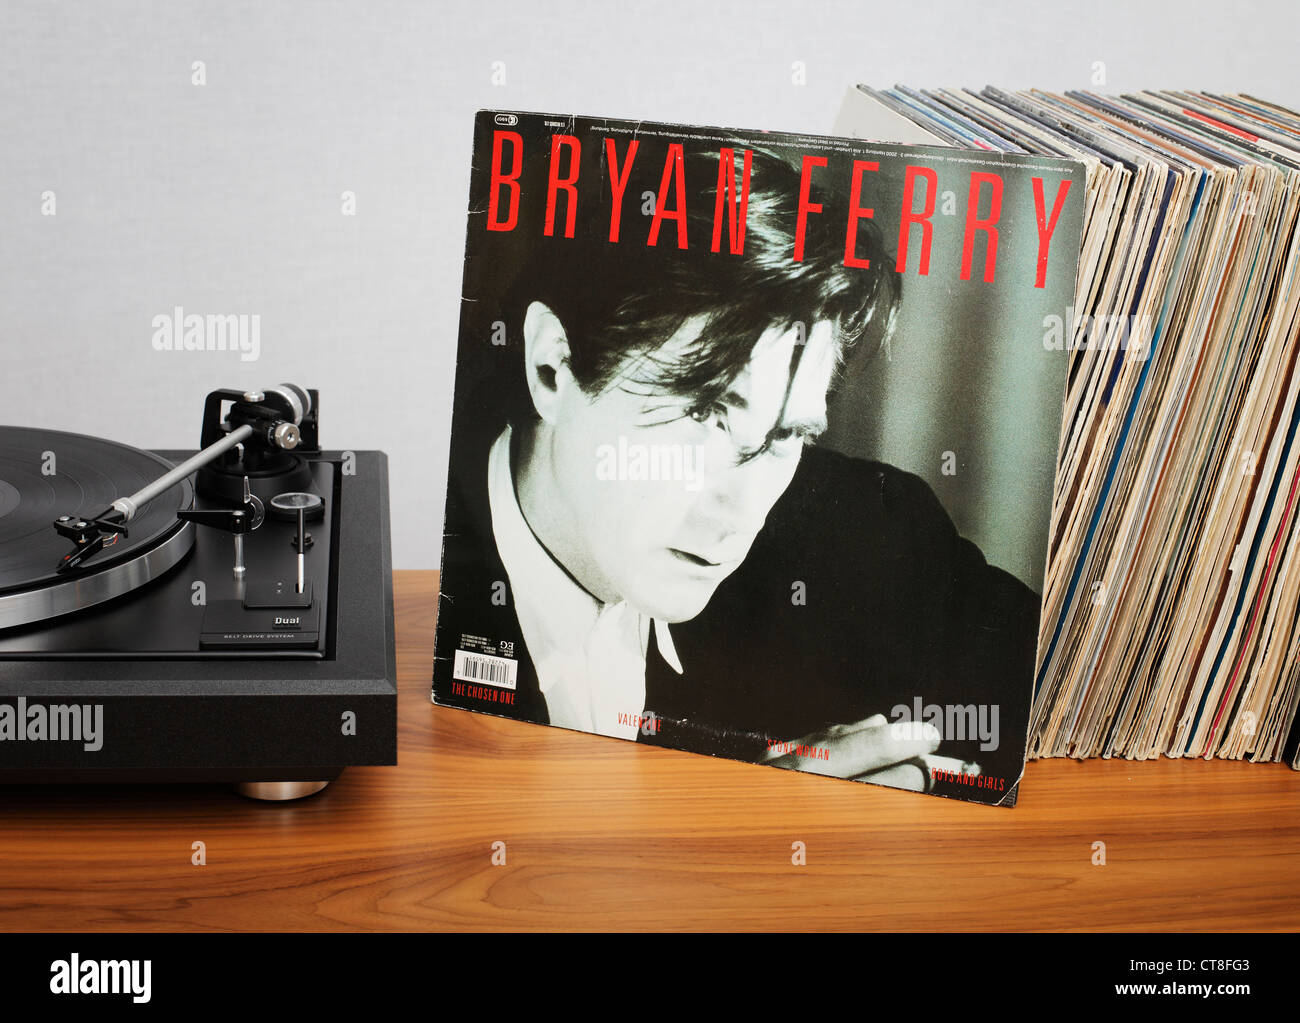 Boys and Girls is Bryan Ferry's sixth solo album, released in 1985 by EG Records. Stock Photo